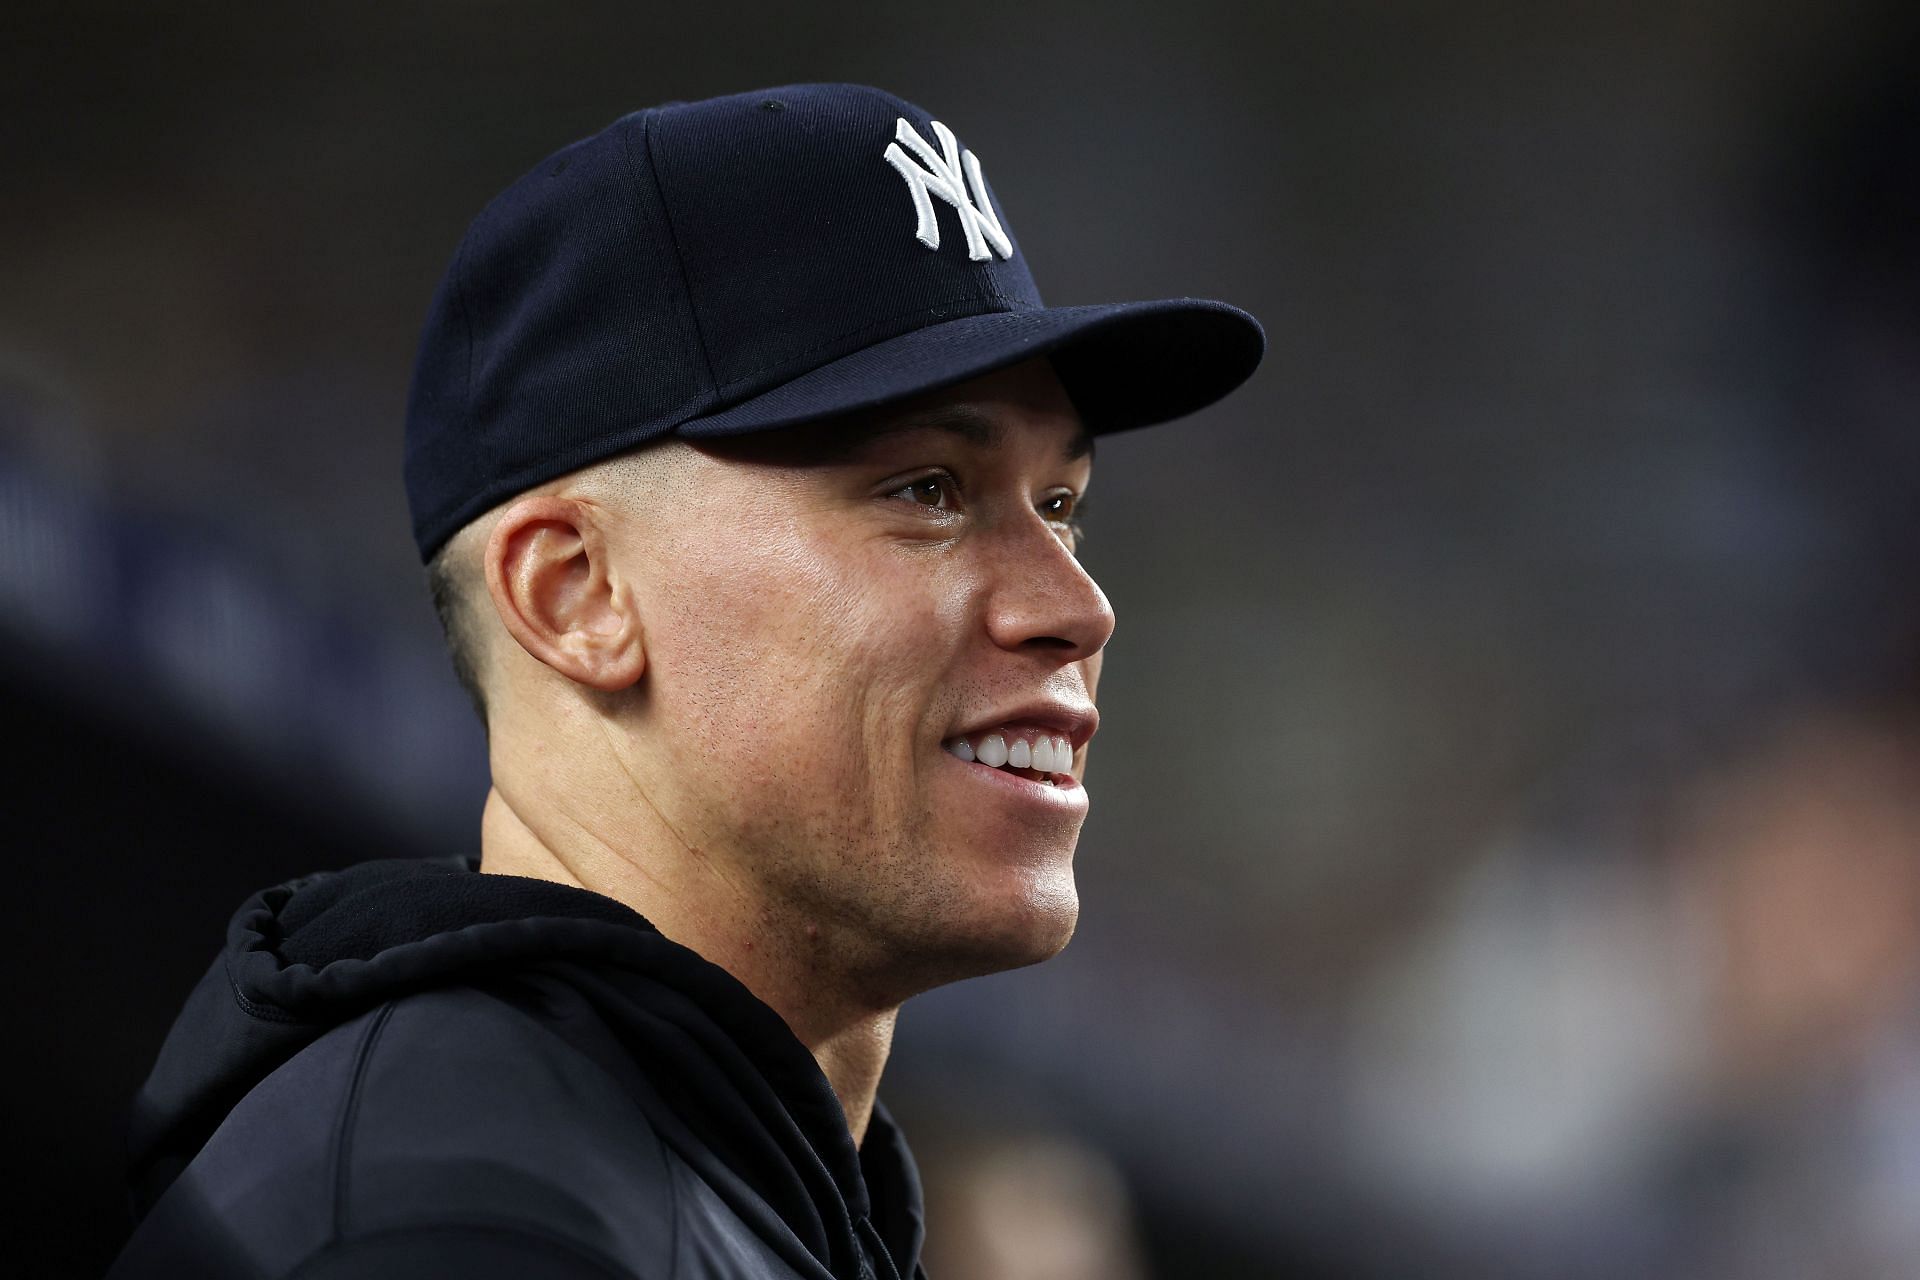 Yankees slugger Aaron Judge faces live pitching for the first time since  right toe injury – KGET 17